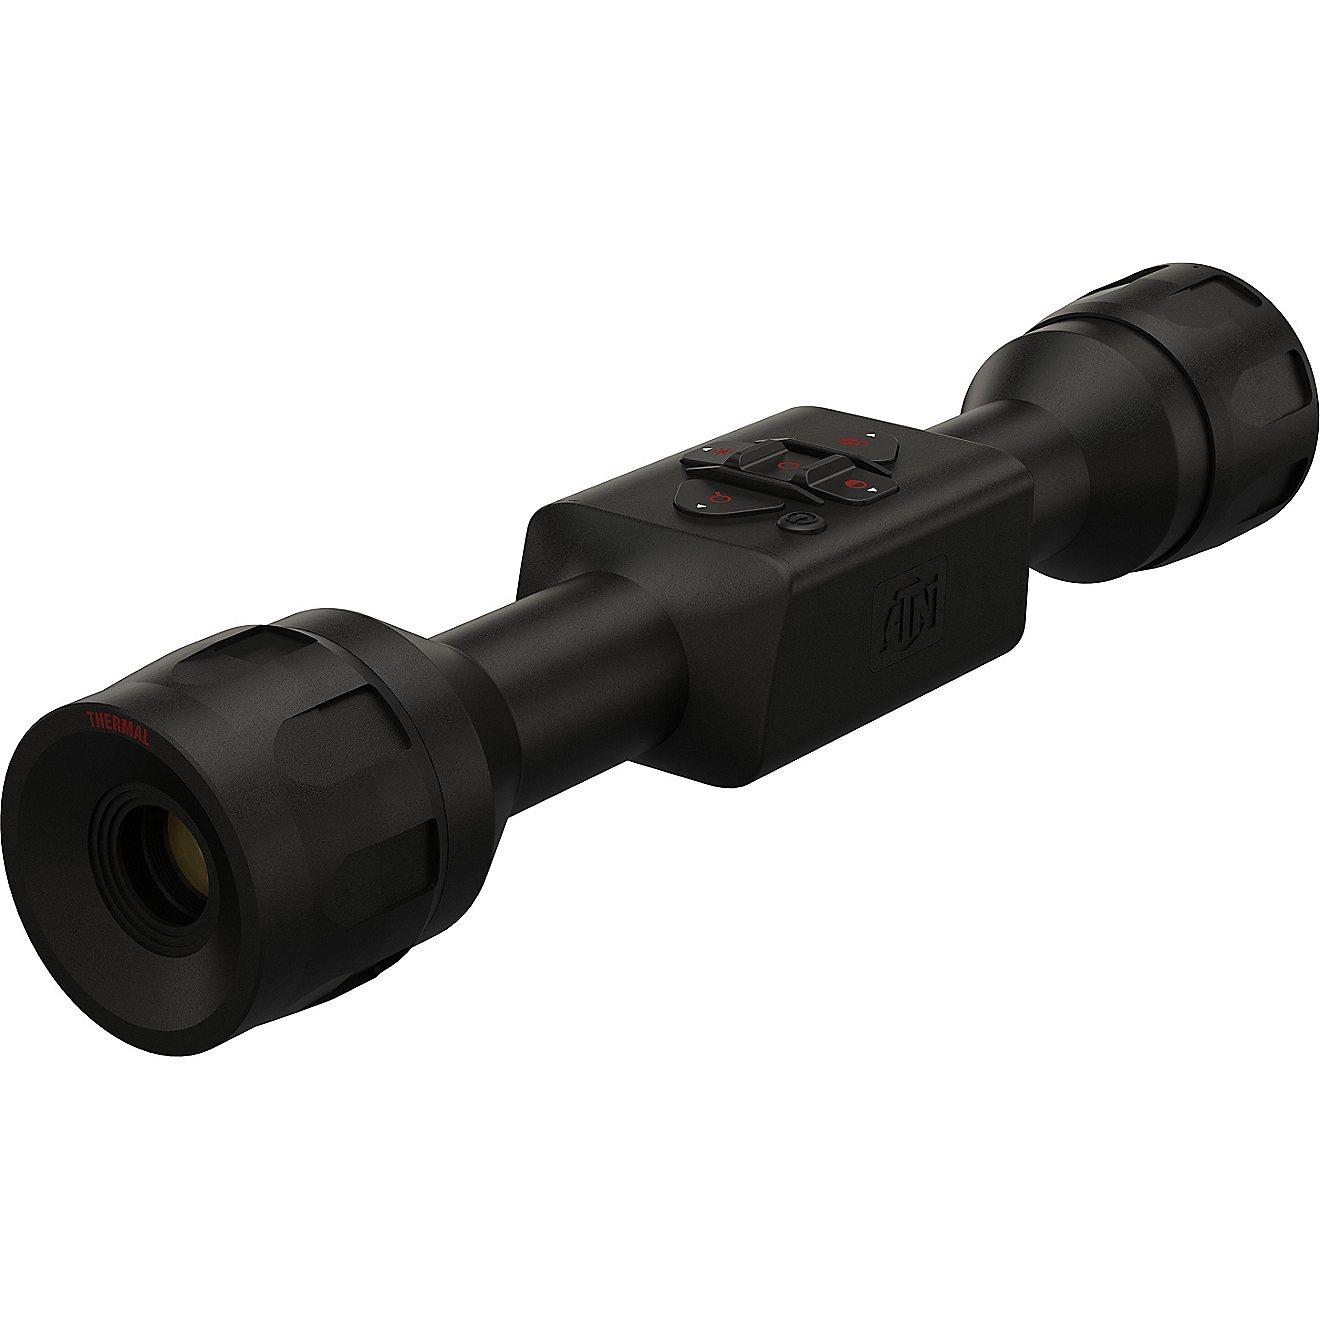 ATN Thor LT Thermal Riflescope                                                                                                   - view number 1